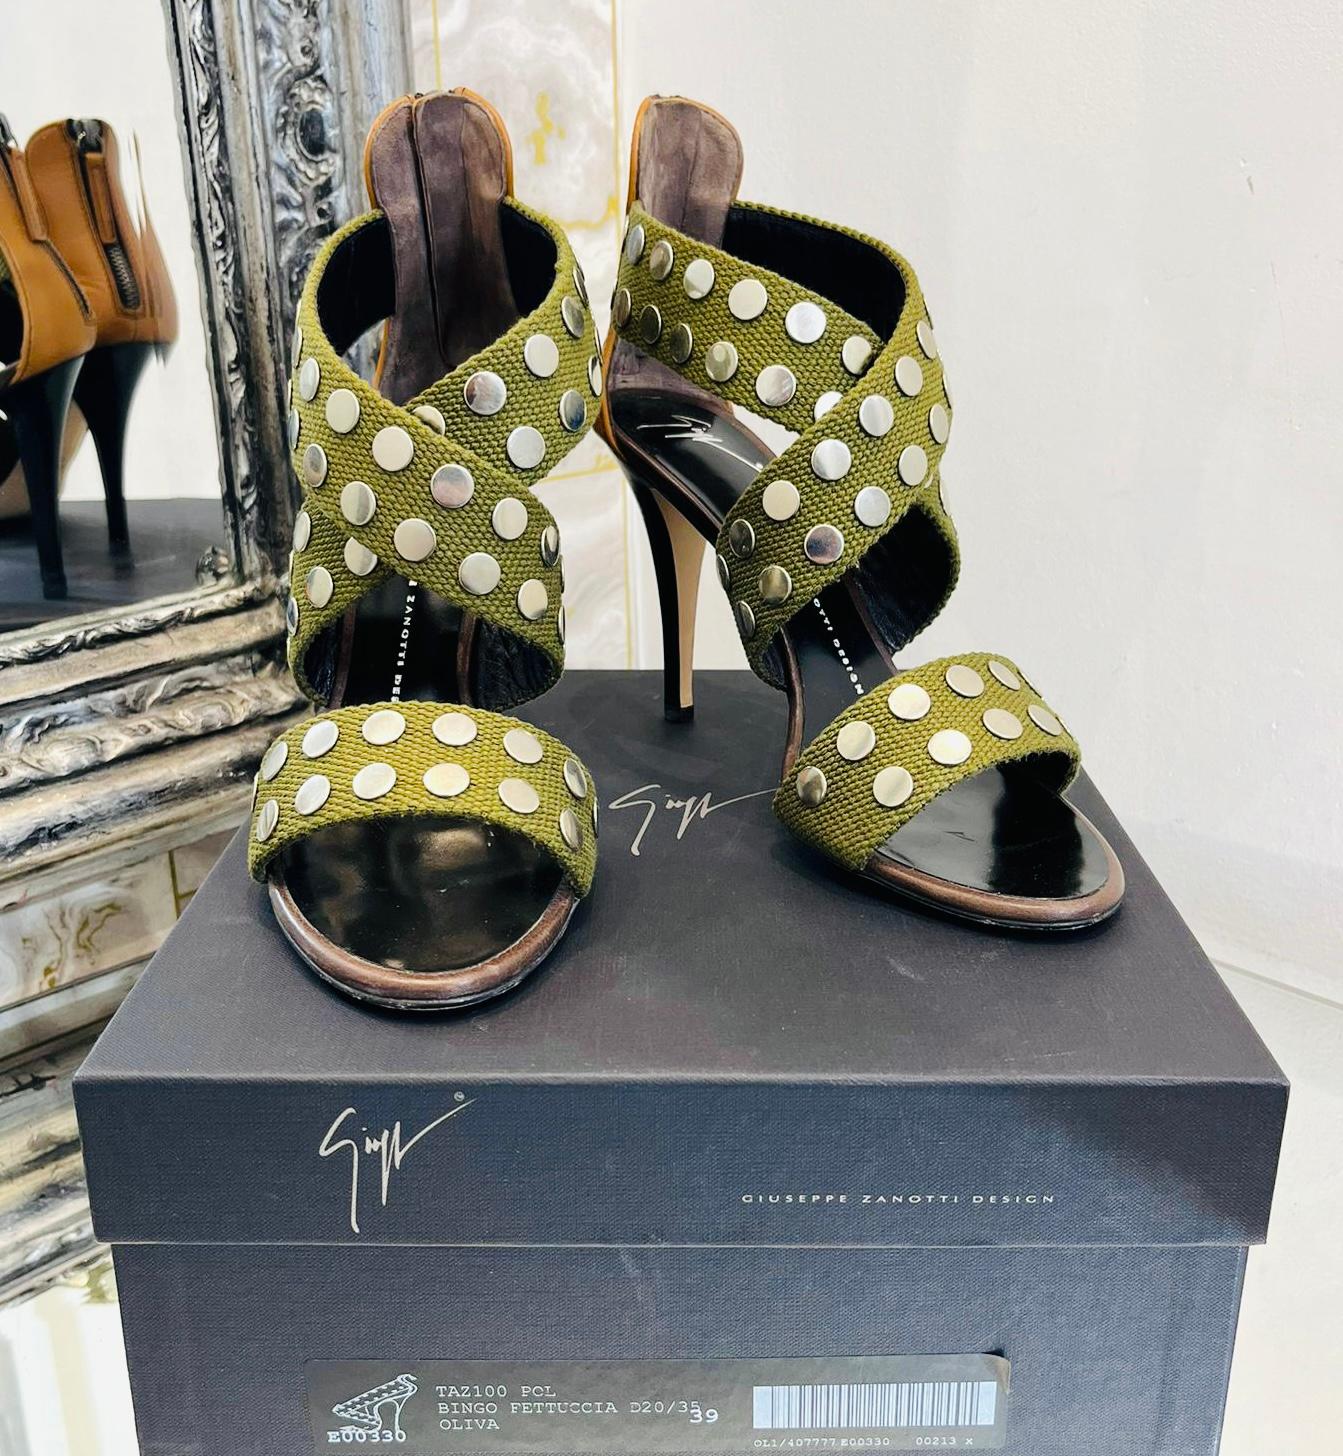 Giuseppe Zanotti Studded Sandals

Military green, open toe sandals designed with silver studs embellishment to the straps.

Featuring camel leather inserts to the heel with zipper closure.

Size – 39

Condition – Very Good

Composition –